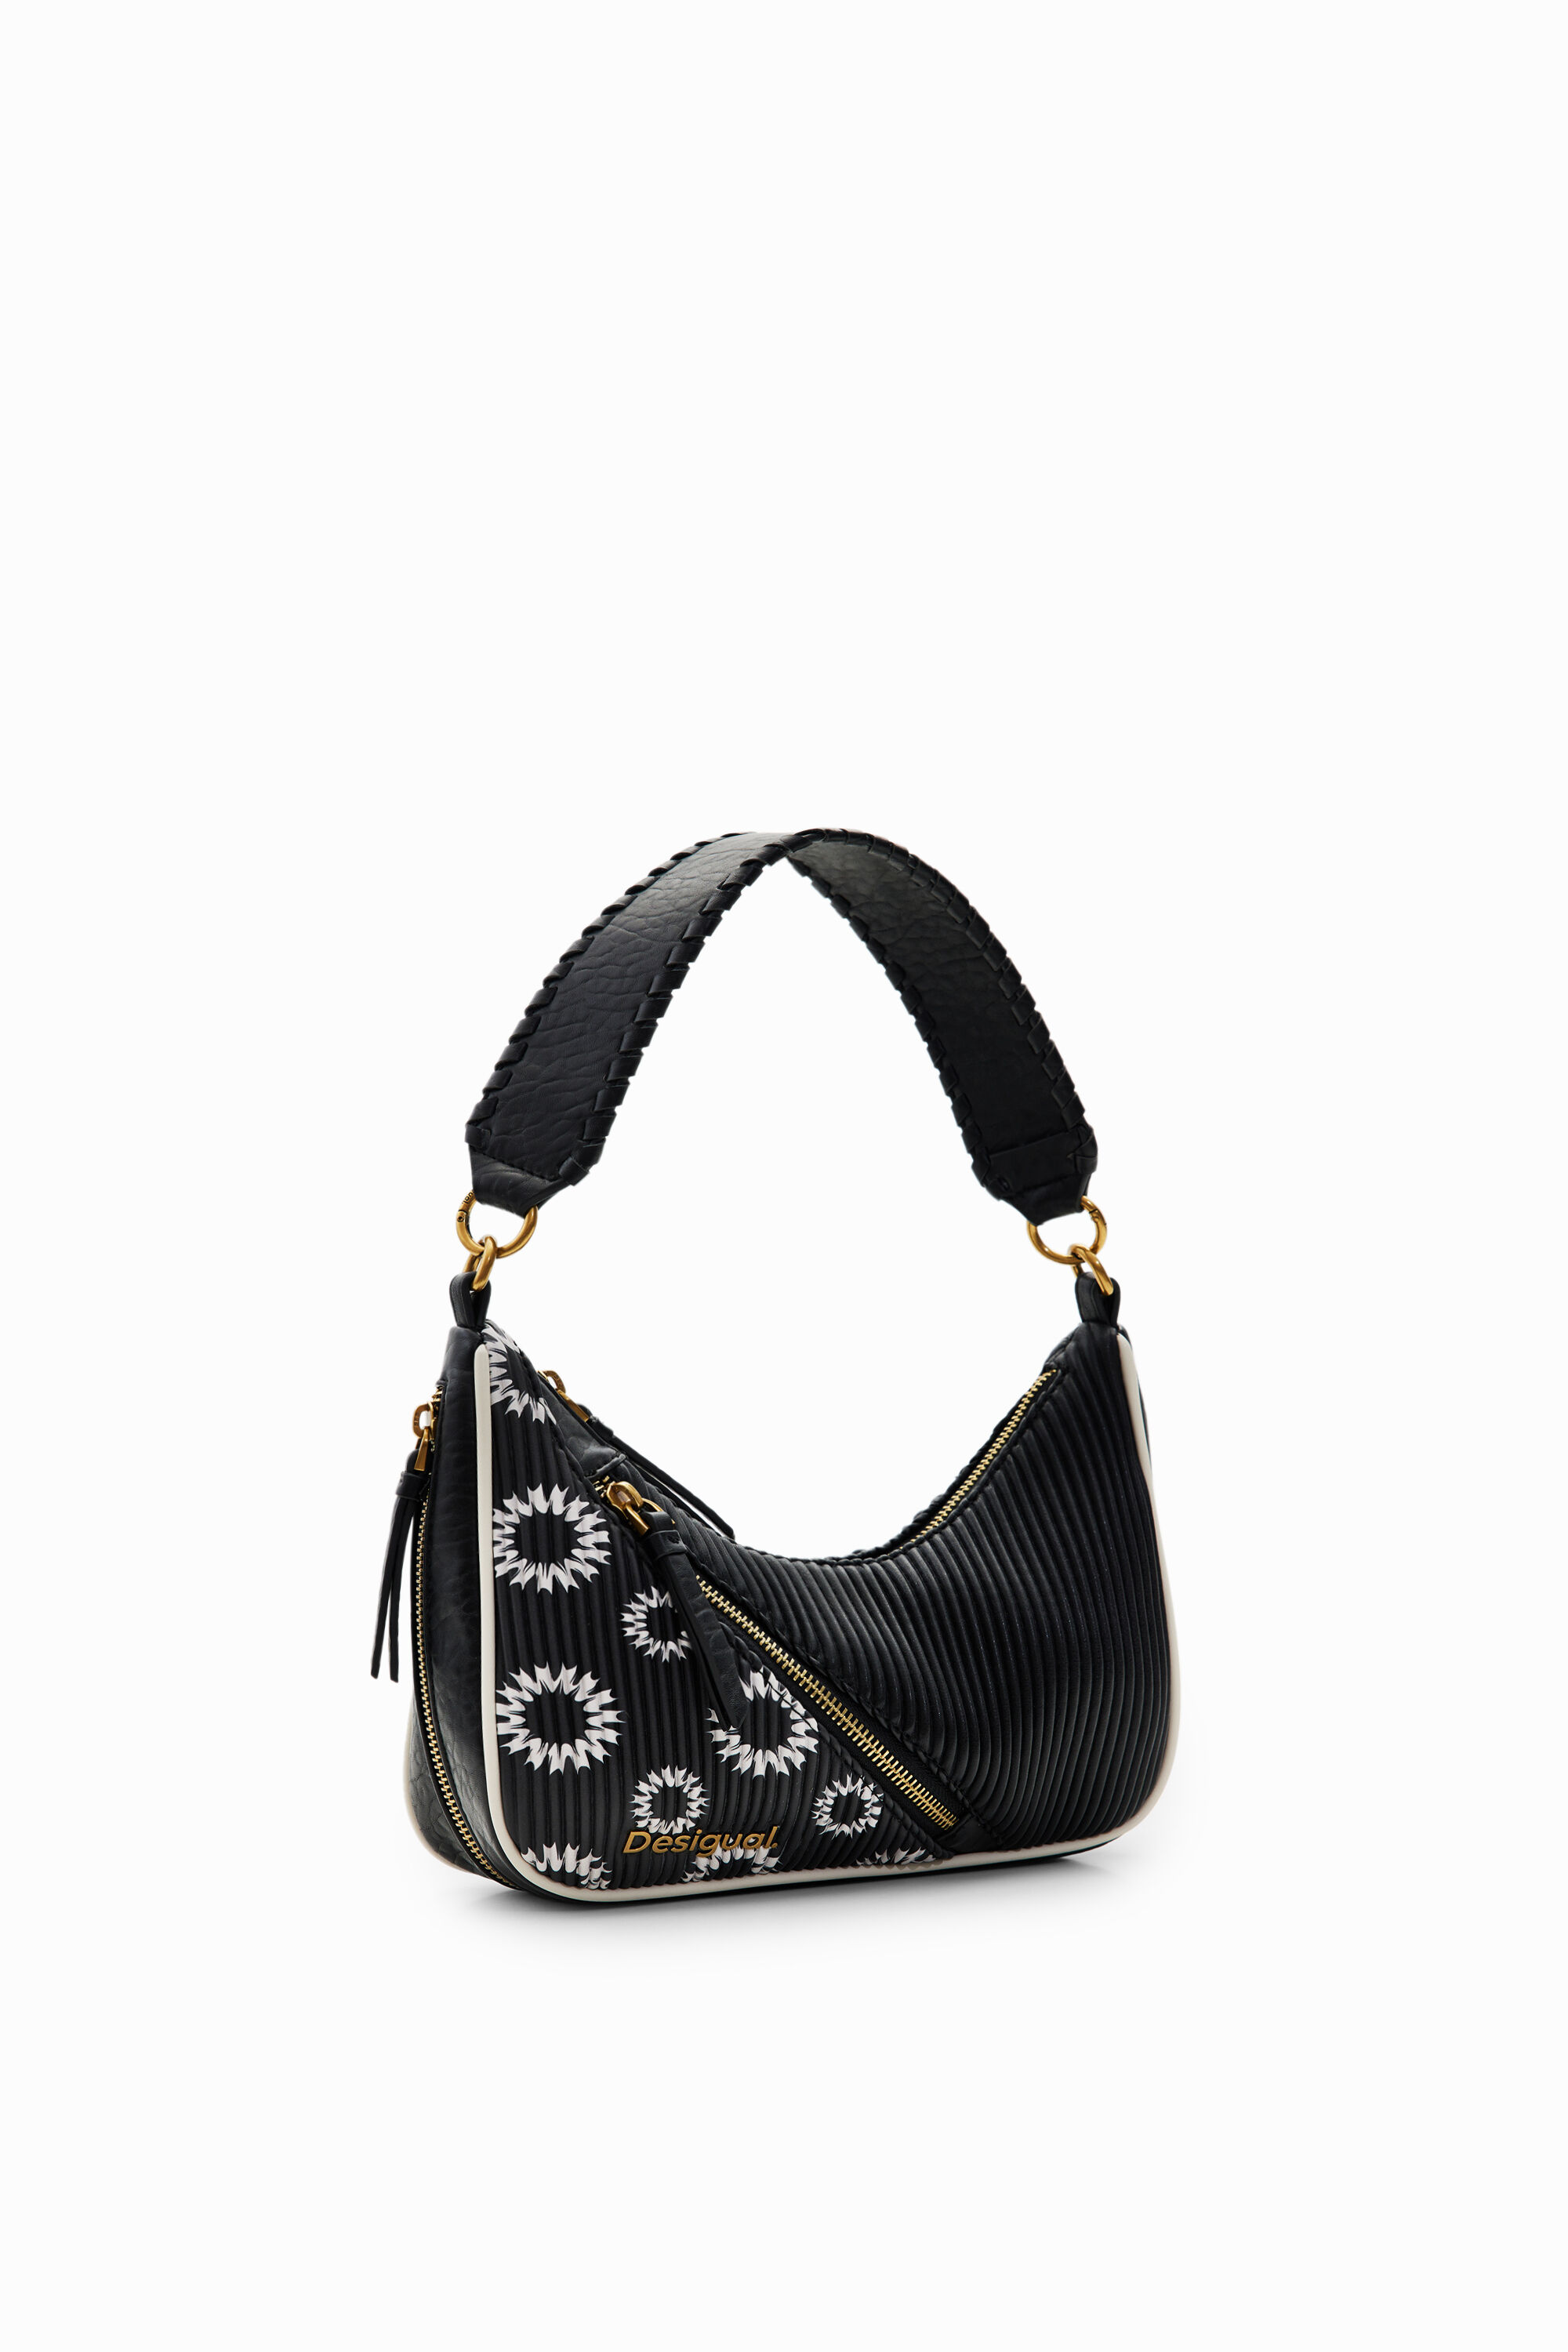 Desigual Small Patchwork Bag In Black